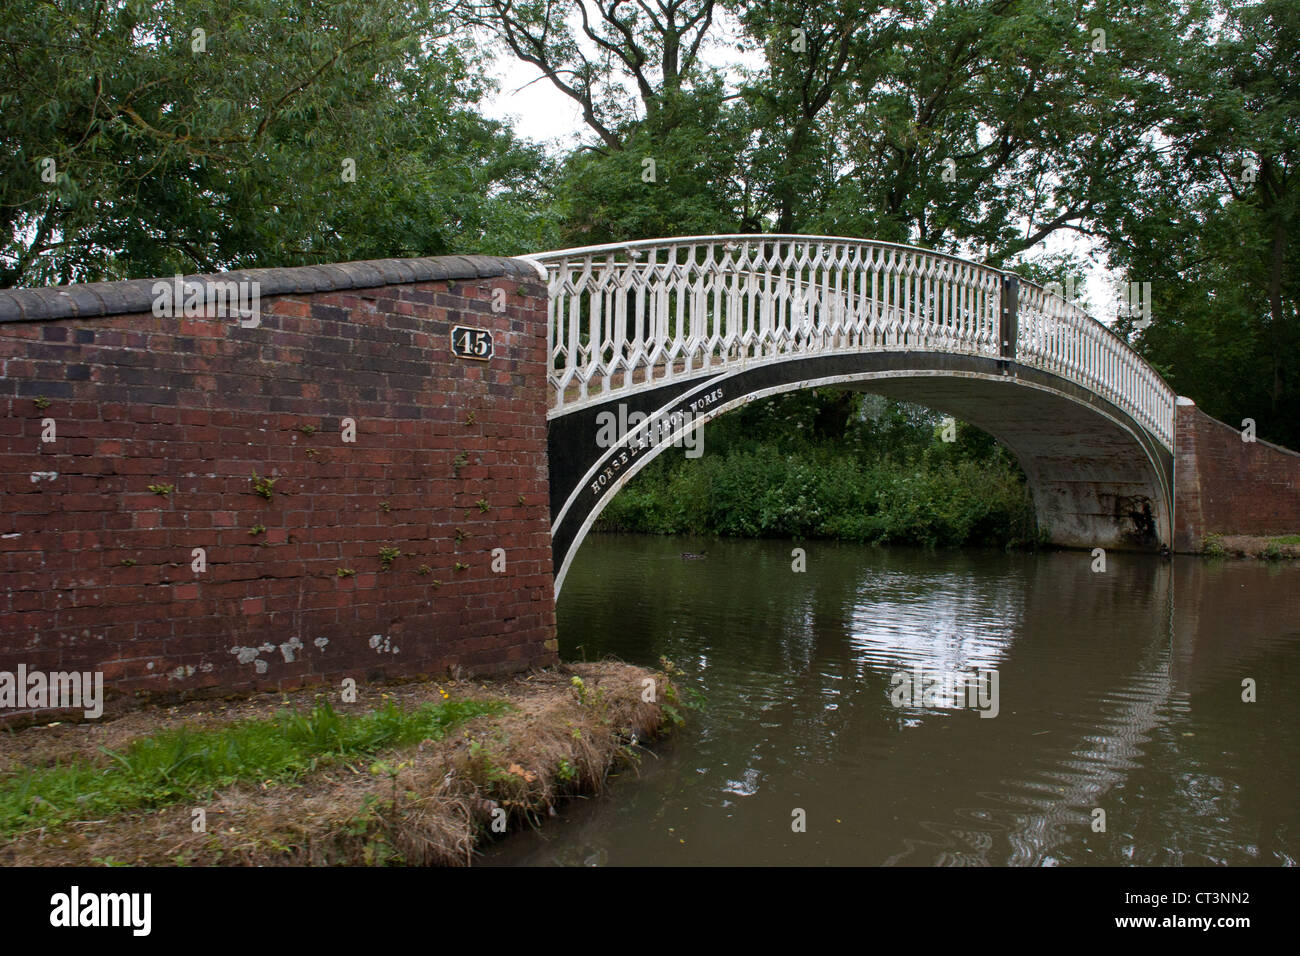 This Bridge number 45 at the entrance of the old Oxford canal - course of Newbold Arm is from Horsley Iron Works.. Stock Photo